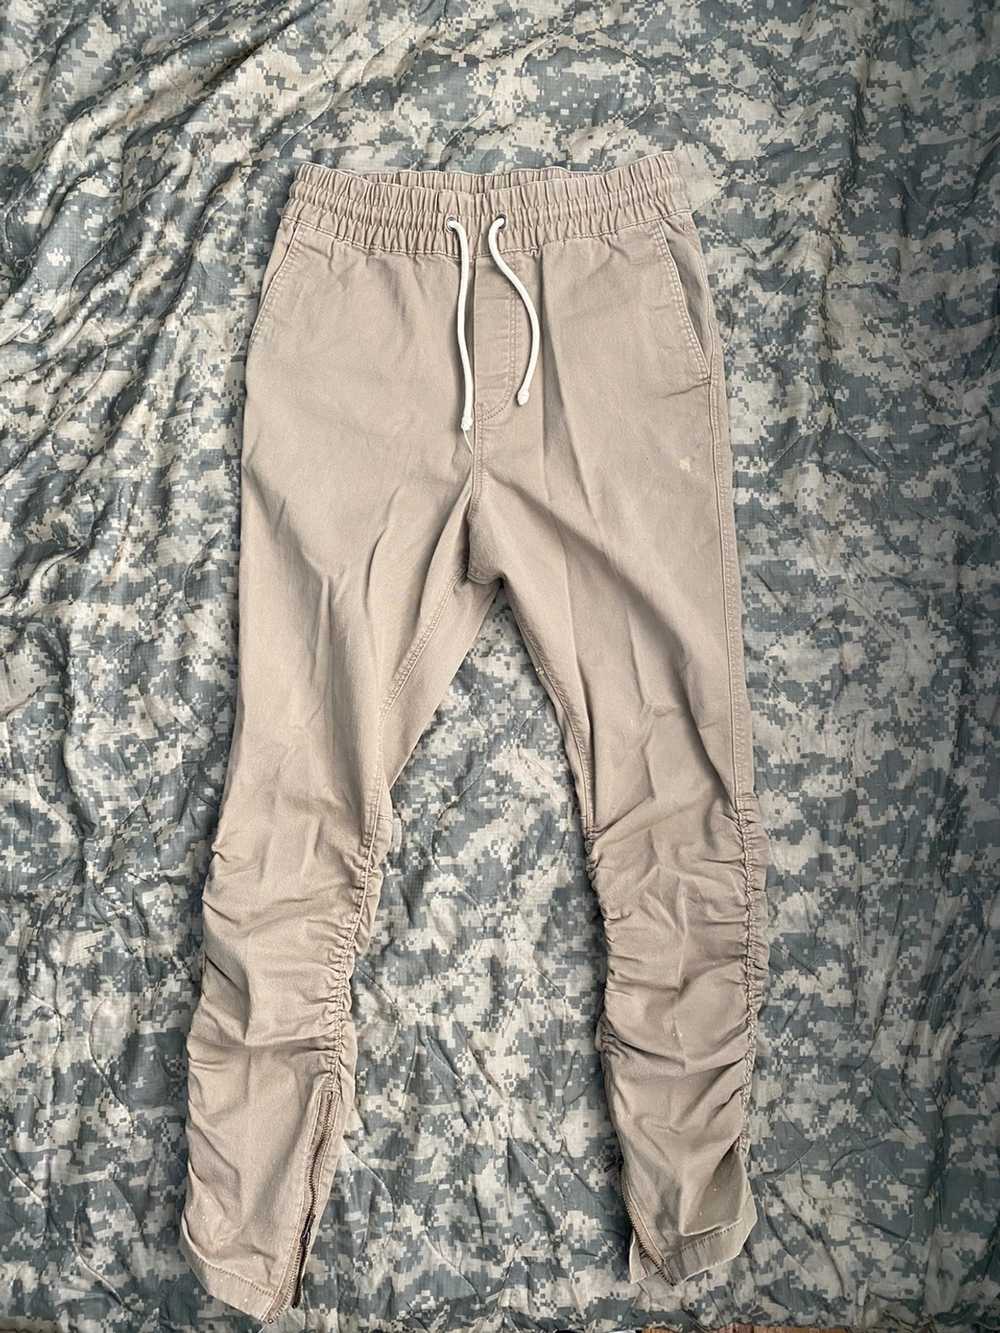 H&M Divided Dark Gray Regular Fit Sweatpants, Relaxed Style Size XXL NWT  Pockets